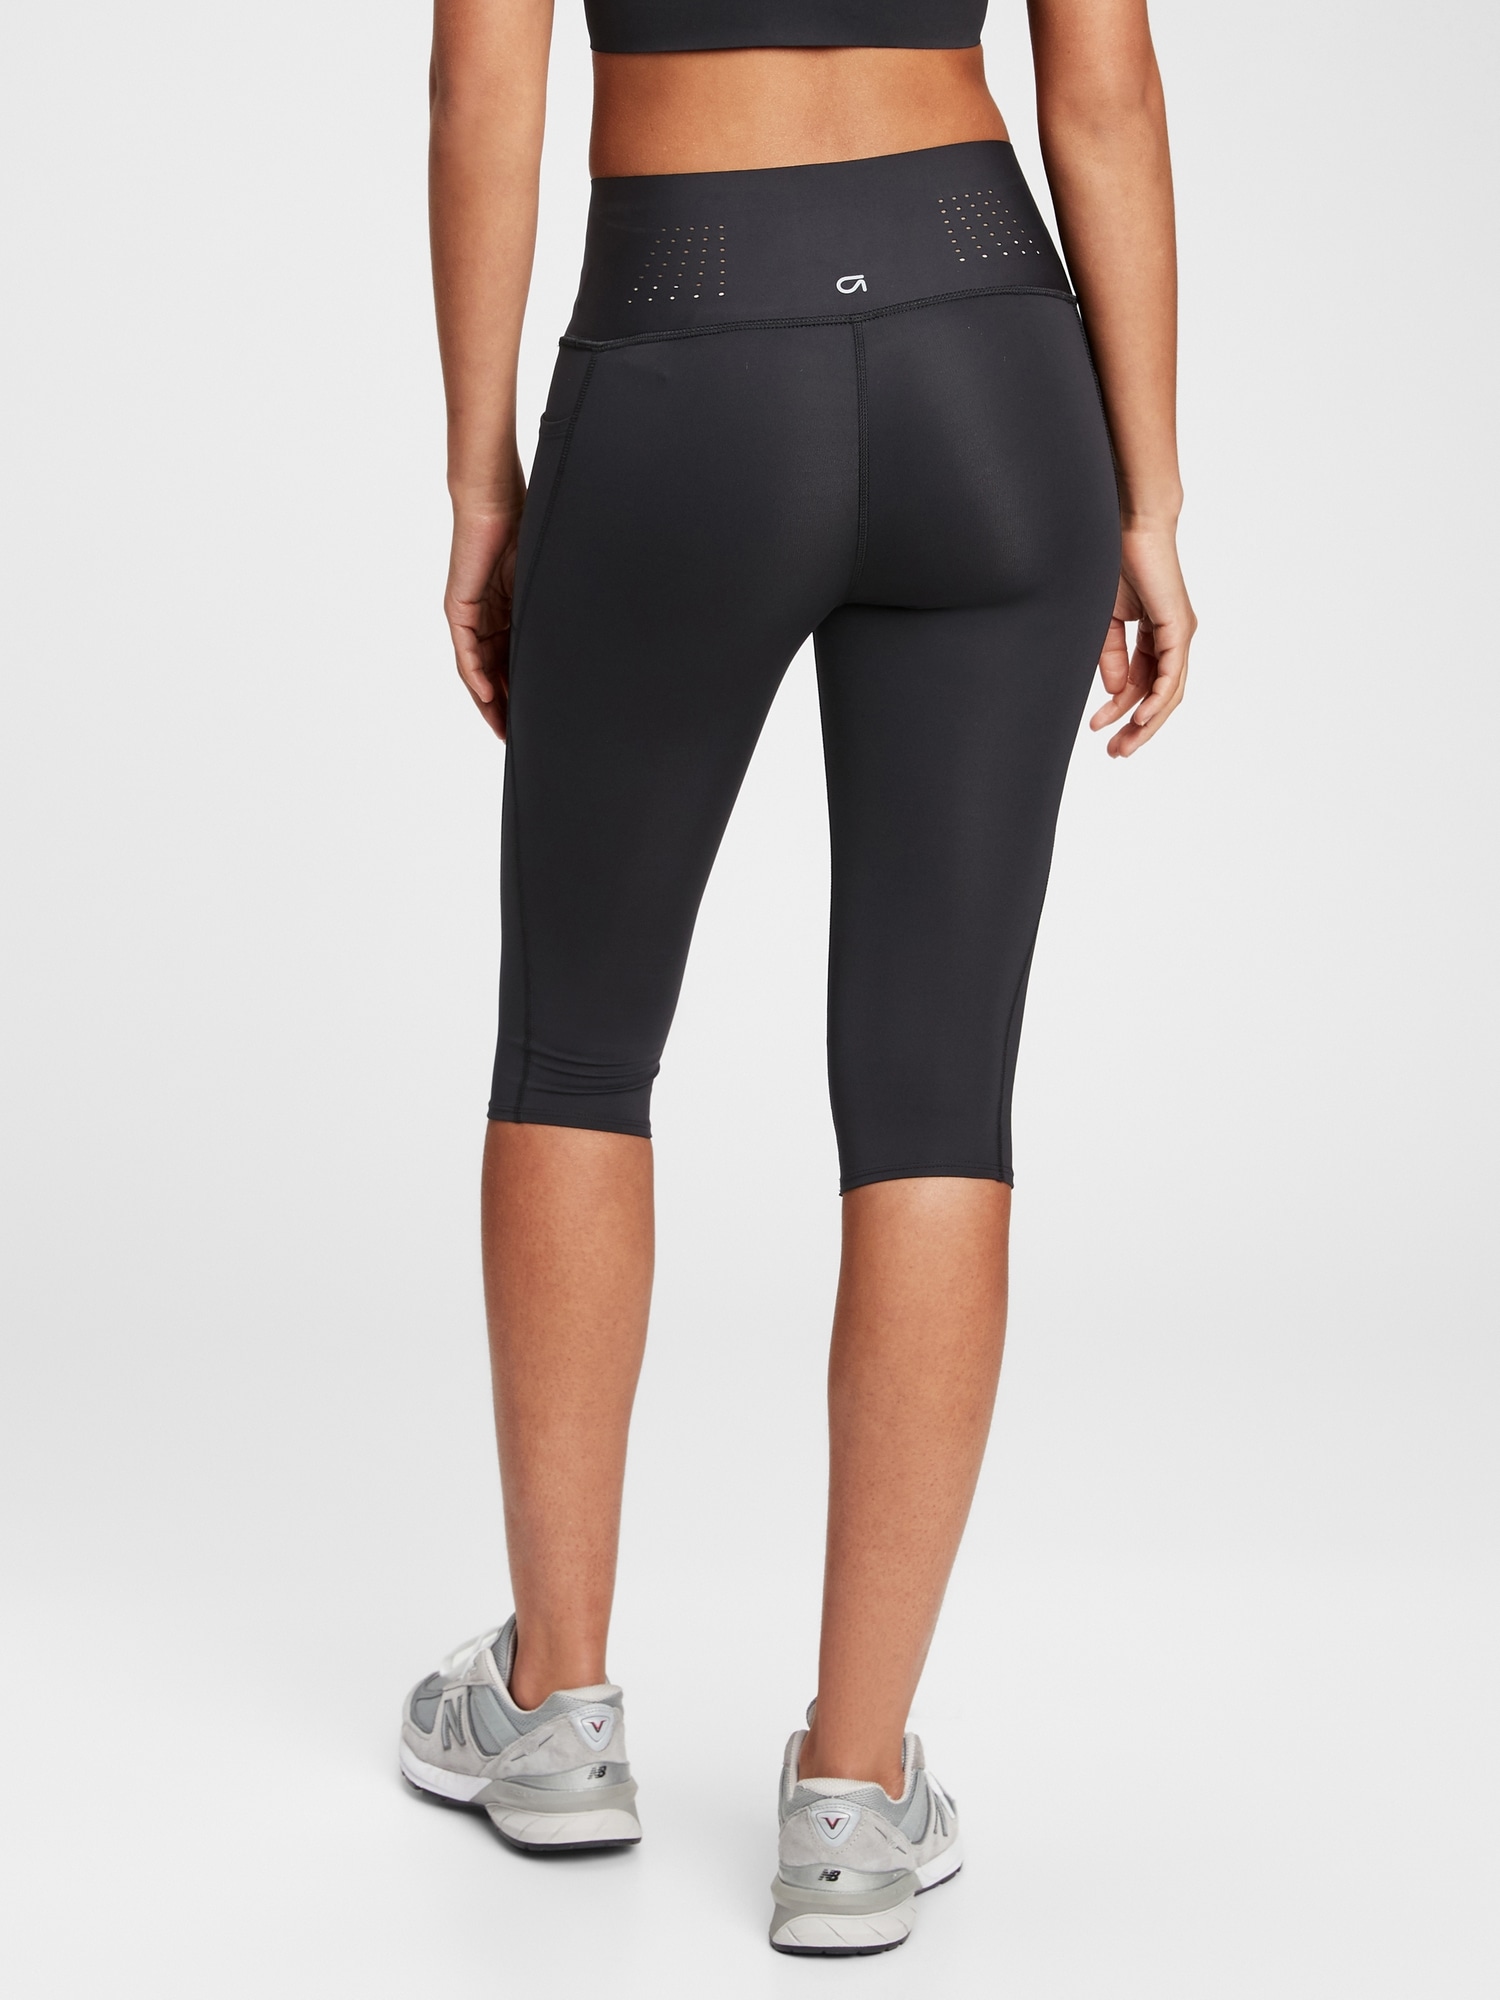 How to pick the Perfect Leggings for your workout!, by TRUE REVO